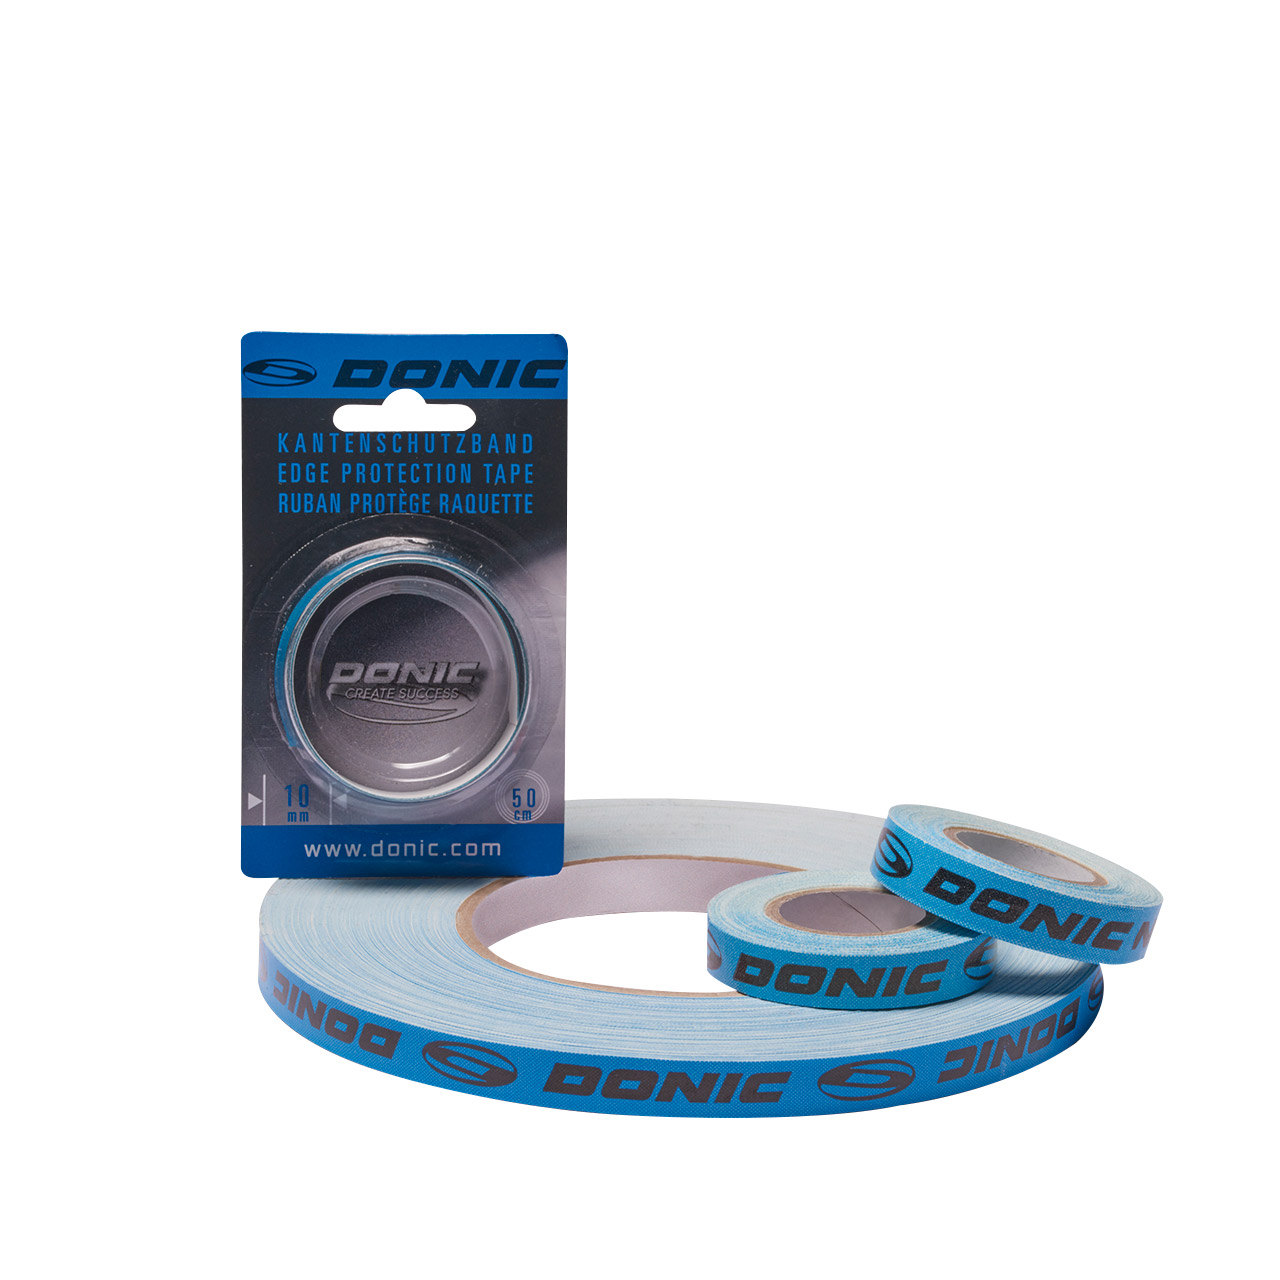 https://www.donic.com/media/image/a1/08/d7/donic-edge-protection_blue.jpg